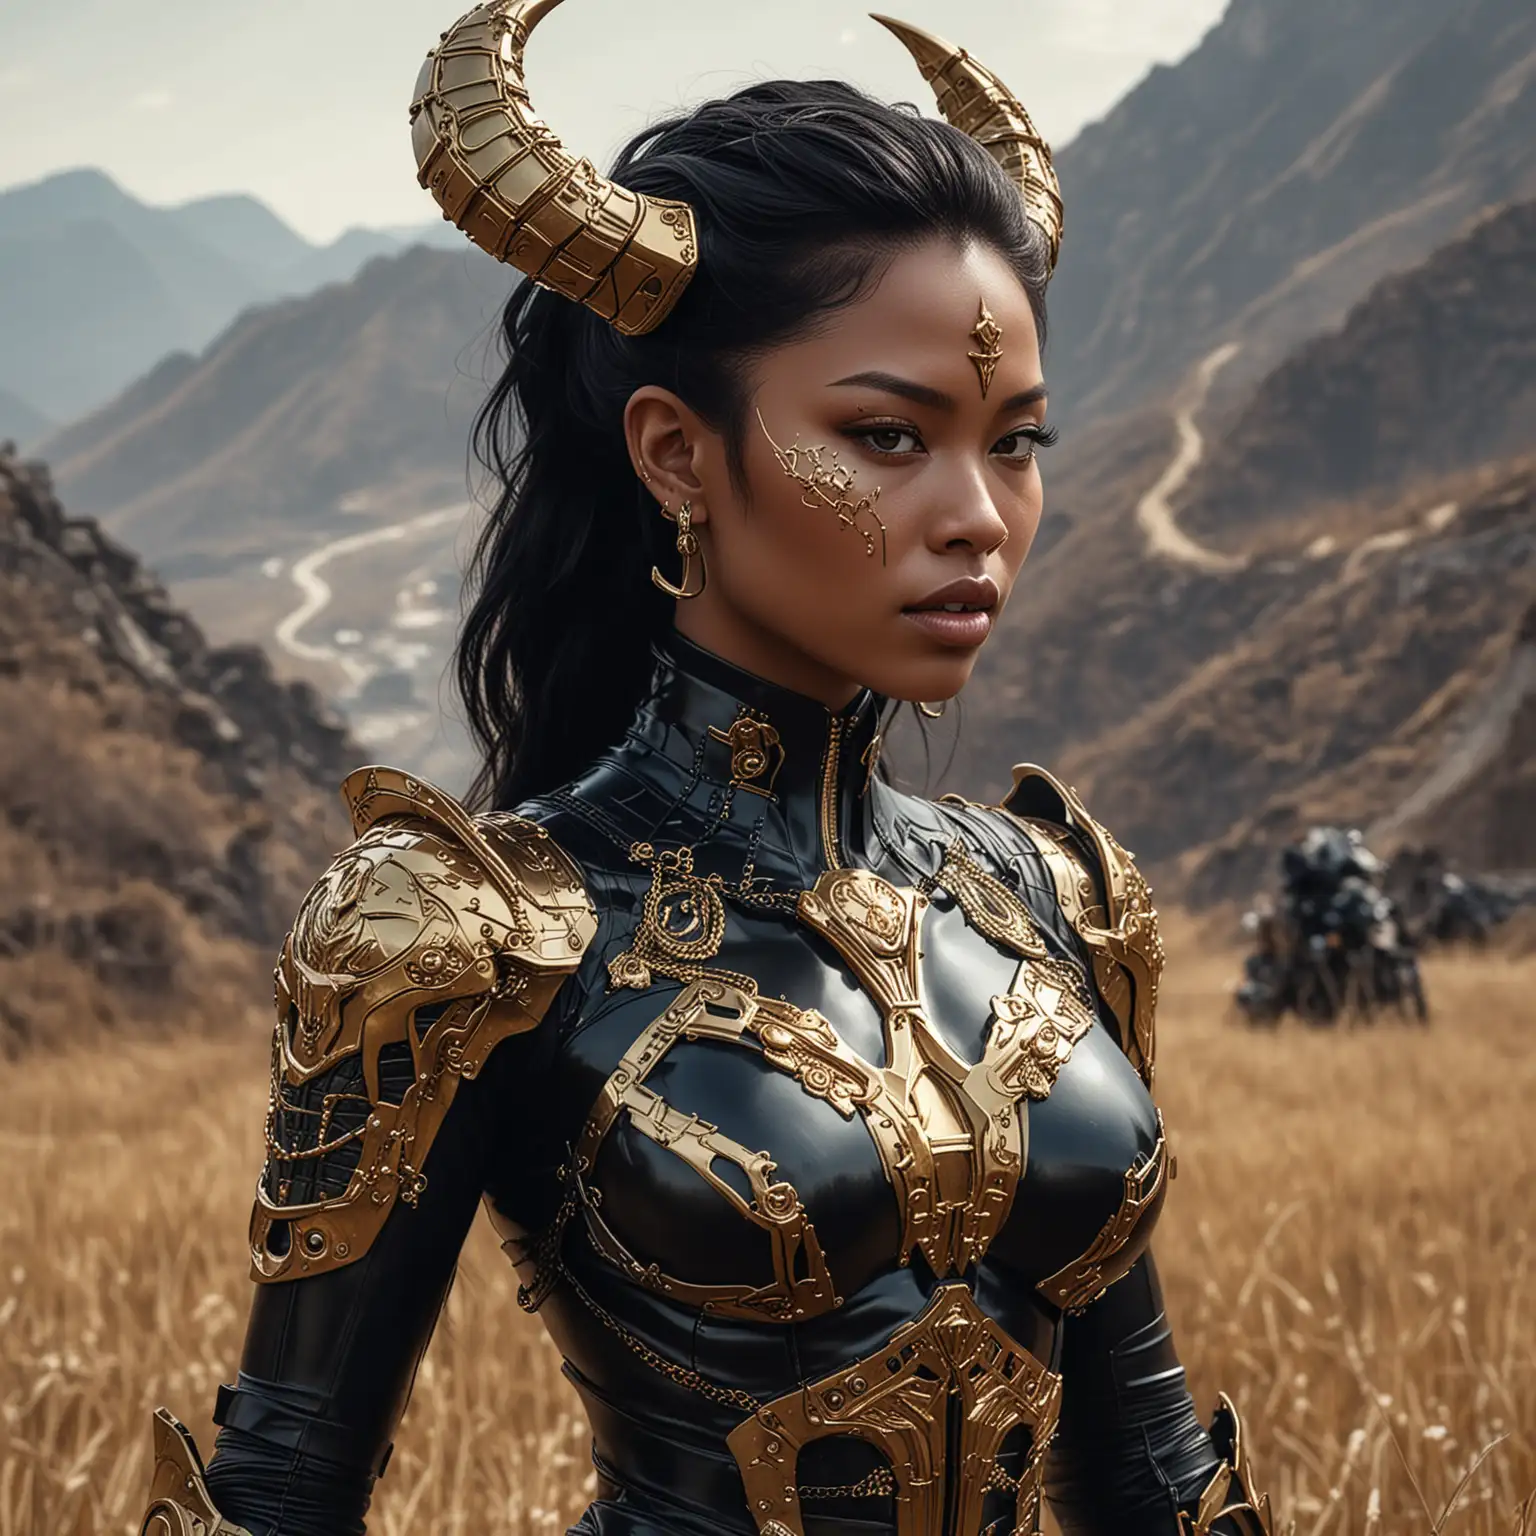 An longing Mariel Tiefling  Woman,SPYRAL Double Agent,wearing a suit holding a black and gold cyber gauntlet, possibly depicting a scene of espionage or cybercrime.
  takes place in a parched field scattered with patches of grass, with mountainous terrain containing portions of the Great Wall of China visible in the background.
Mercedes-Benz S-Class in the background 
,The woman's body parts such as chest, thigh, stomach, and abdomen are visible
Boracite Jewelry,  Necklace, Rings and earrings. Black woman painterly smooth, extremely sharp detail, finely tuned, 8 k, ultra sharp focus, illustration, illustration, art by Ayami Kojima Beautiful Thick Sexy Black women 
Tight Coil ‘Fro hairstyle 